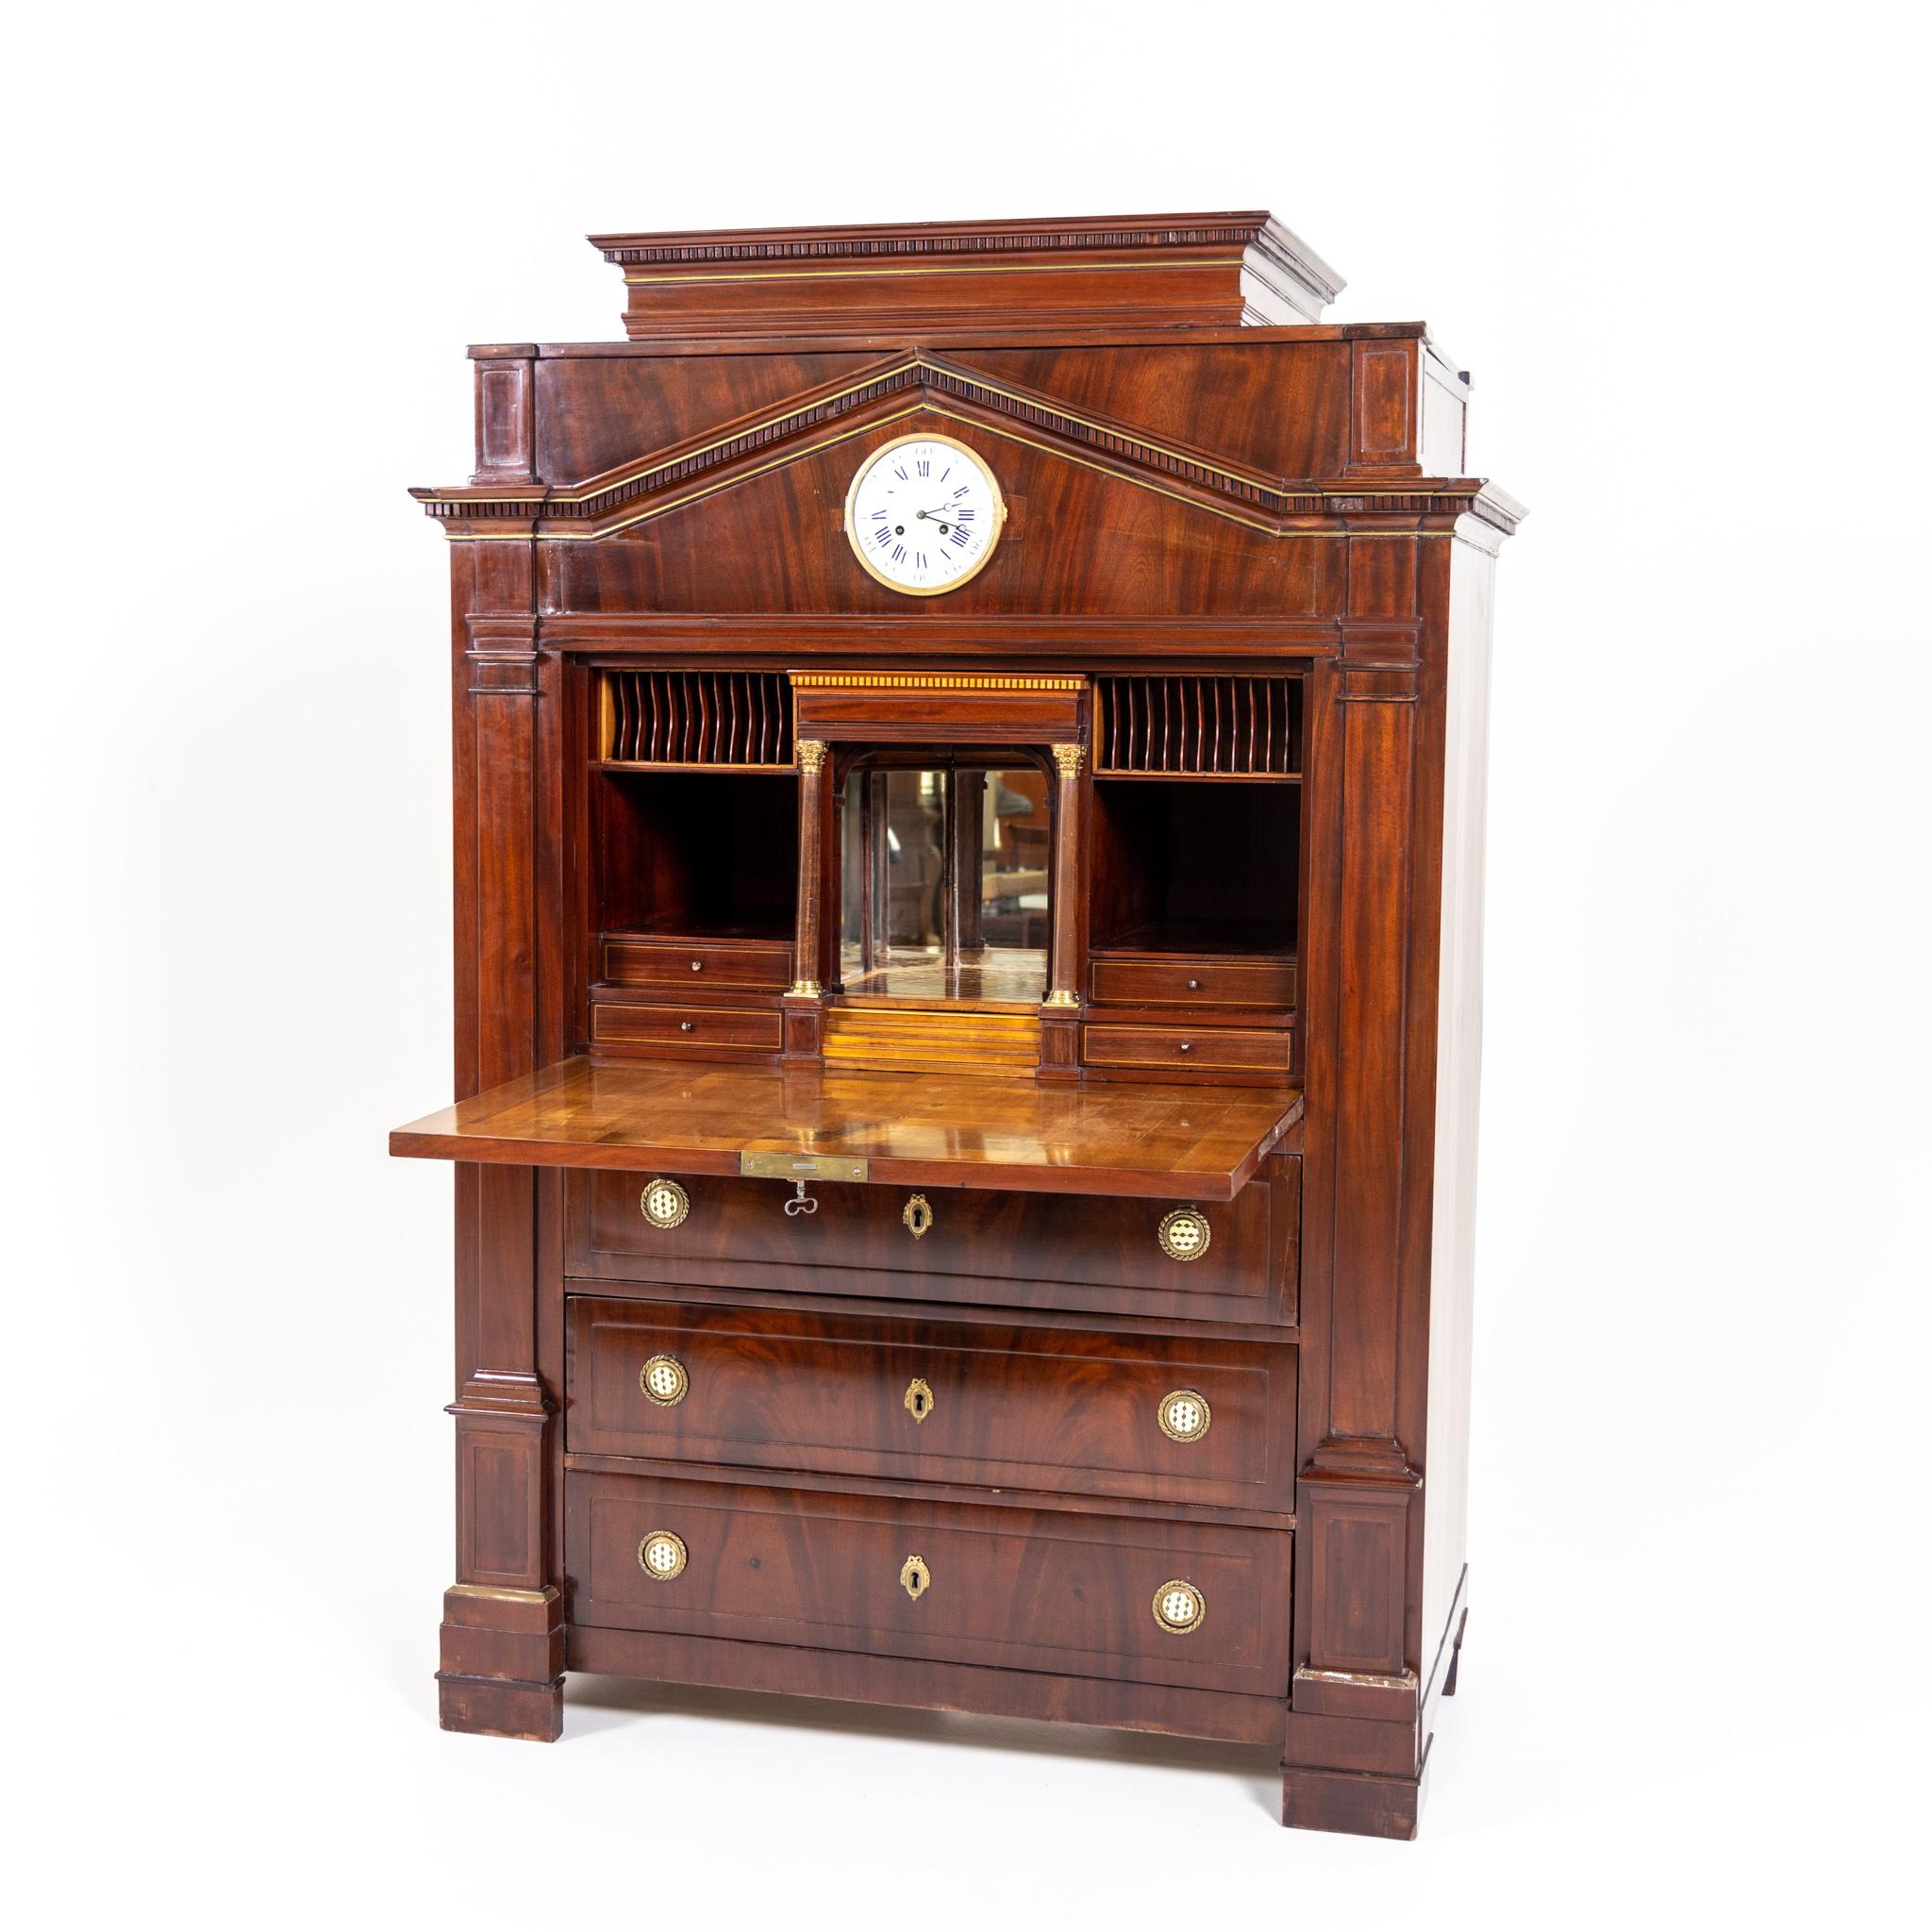 Neoclassical Neoclassiacal Mahogany Secretaire with Clock, Probably Berlin around 1800 For Sale